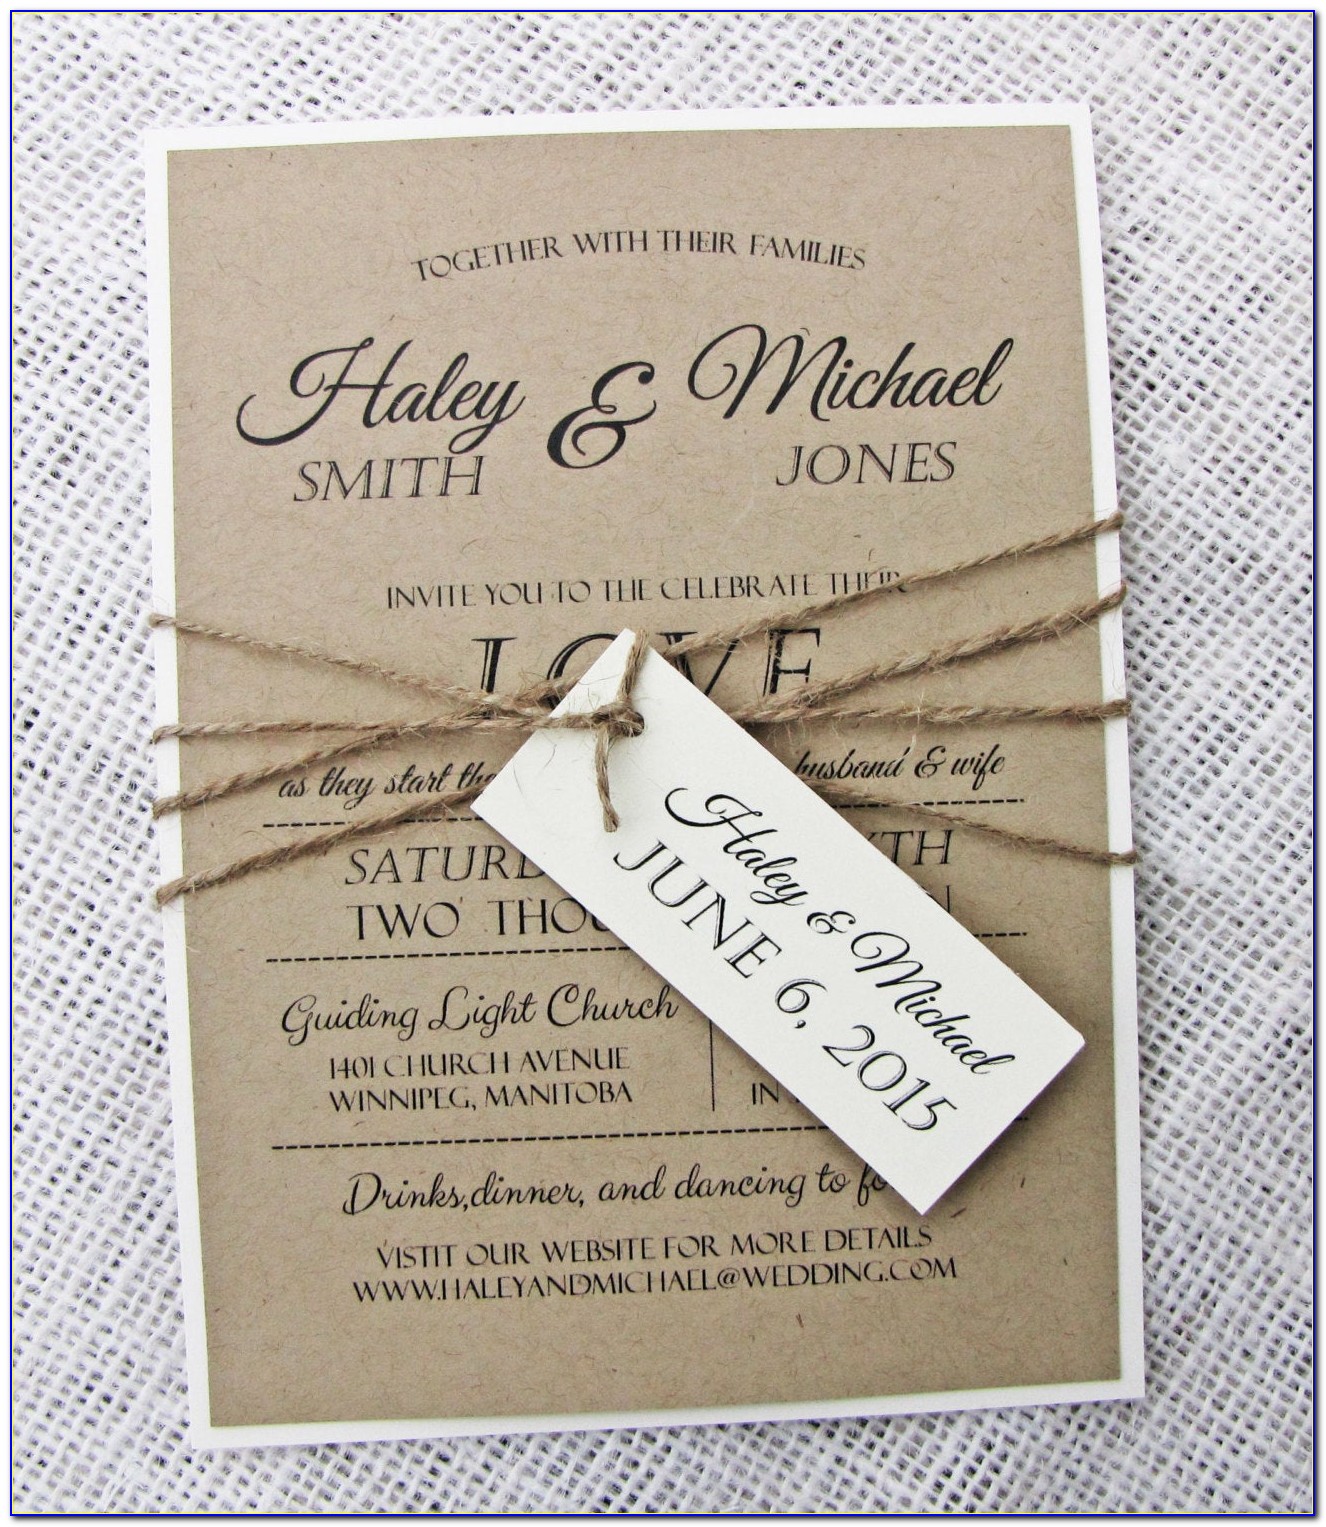 Sample Accommodation Cards For Wedding Invitations